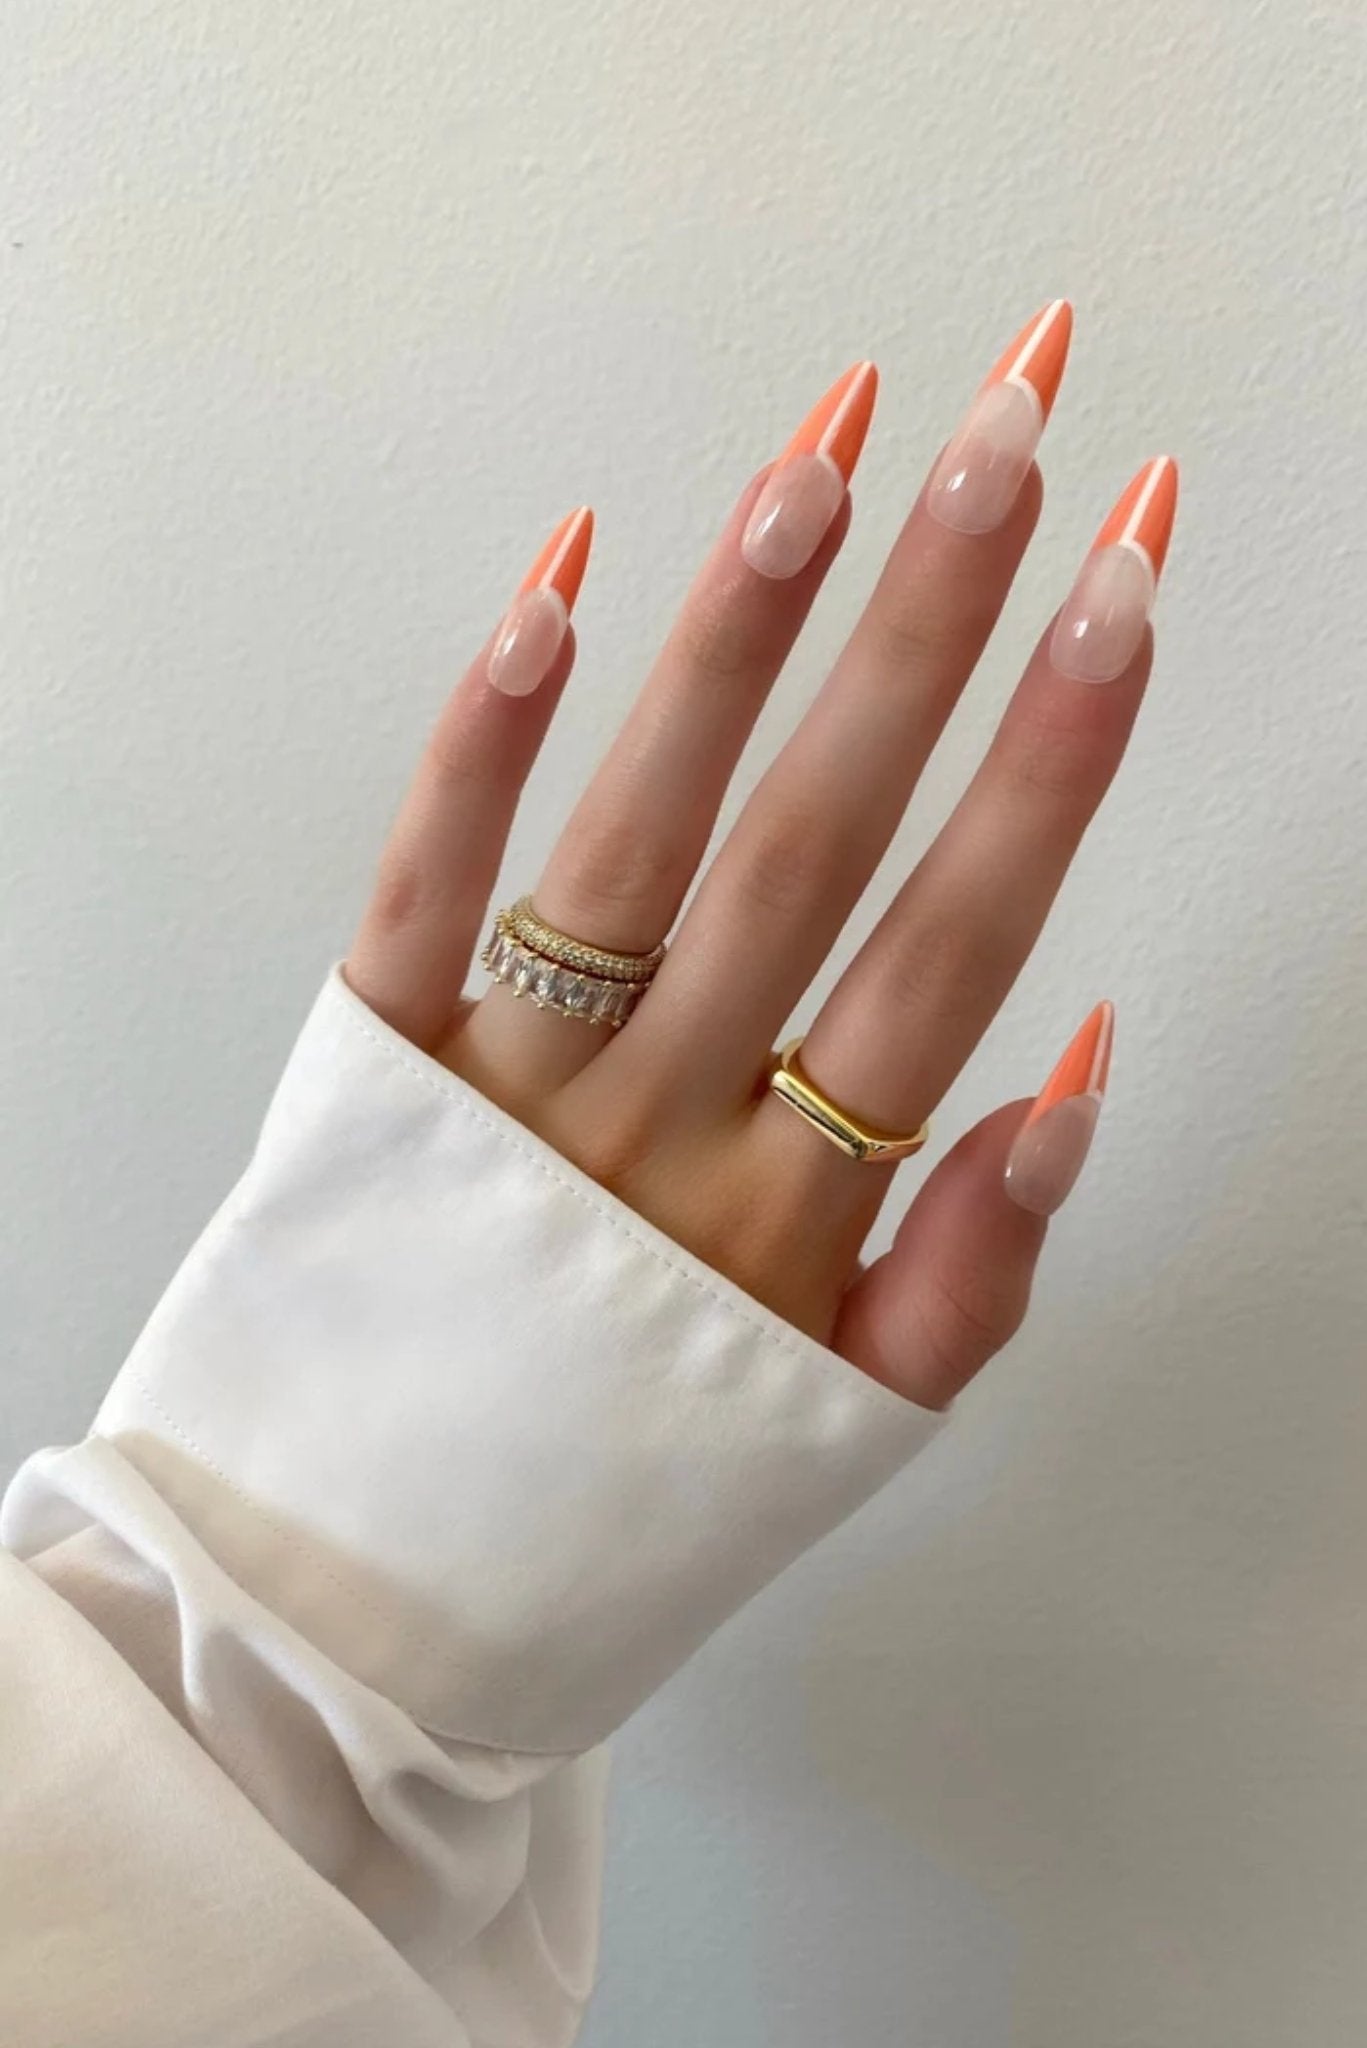 28 Must Try Fall Nail Designs And Ideas 2021! - Page 3 of 28 -  newyearlights. com | Nail designs, Nails, Gel nails